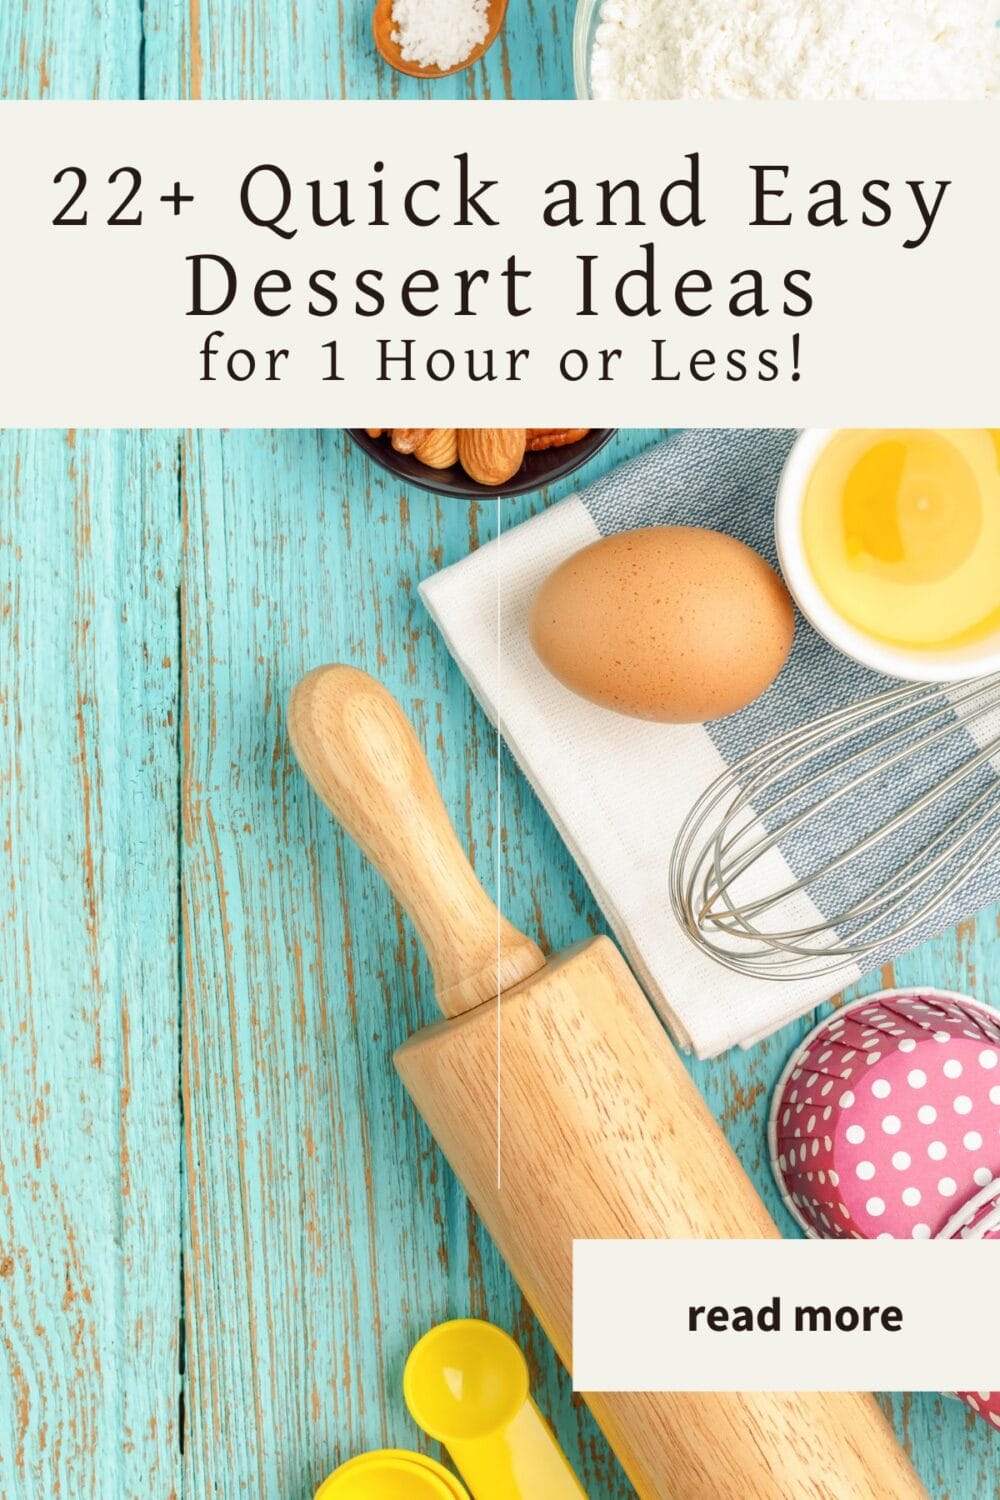 A Pinterest-friendly graphic for my post filled with dessert recipes that can be assembled in one hour or less.